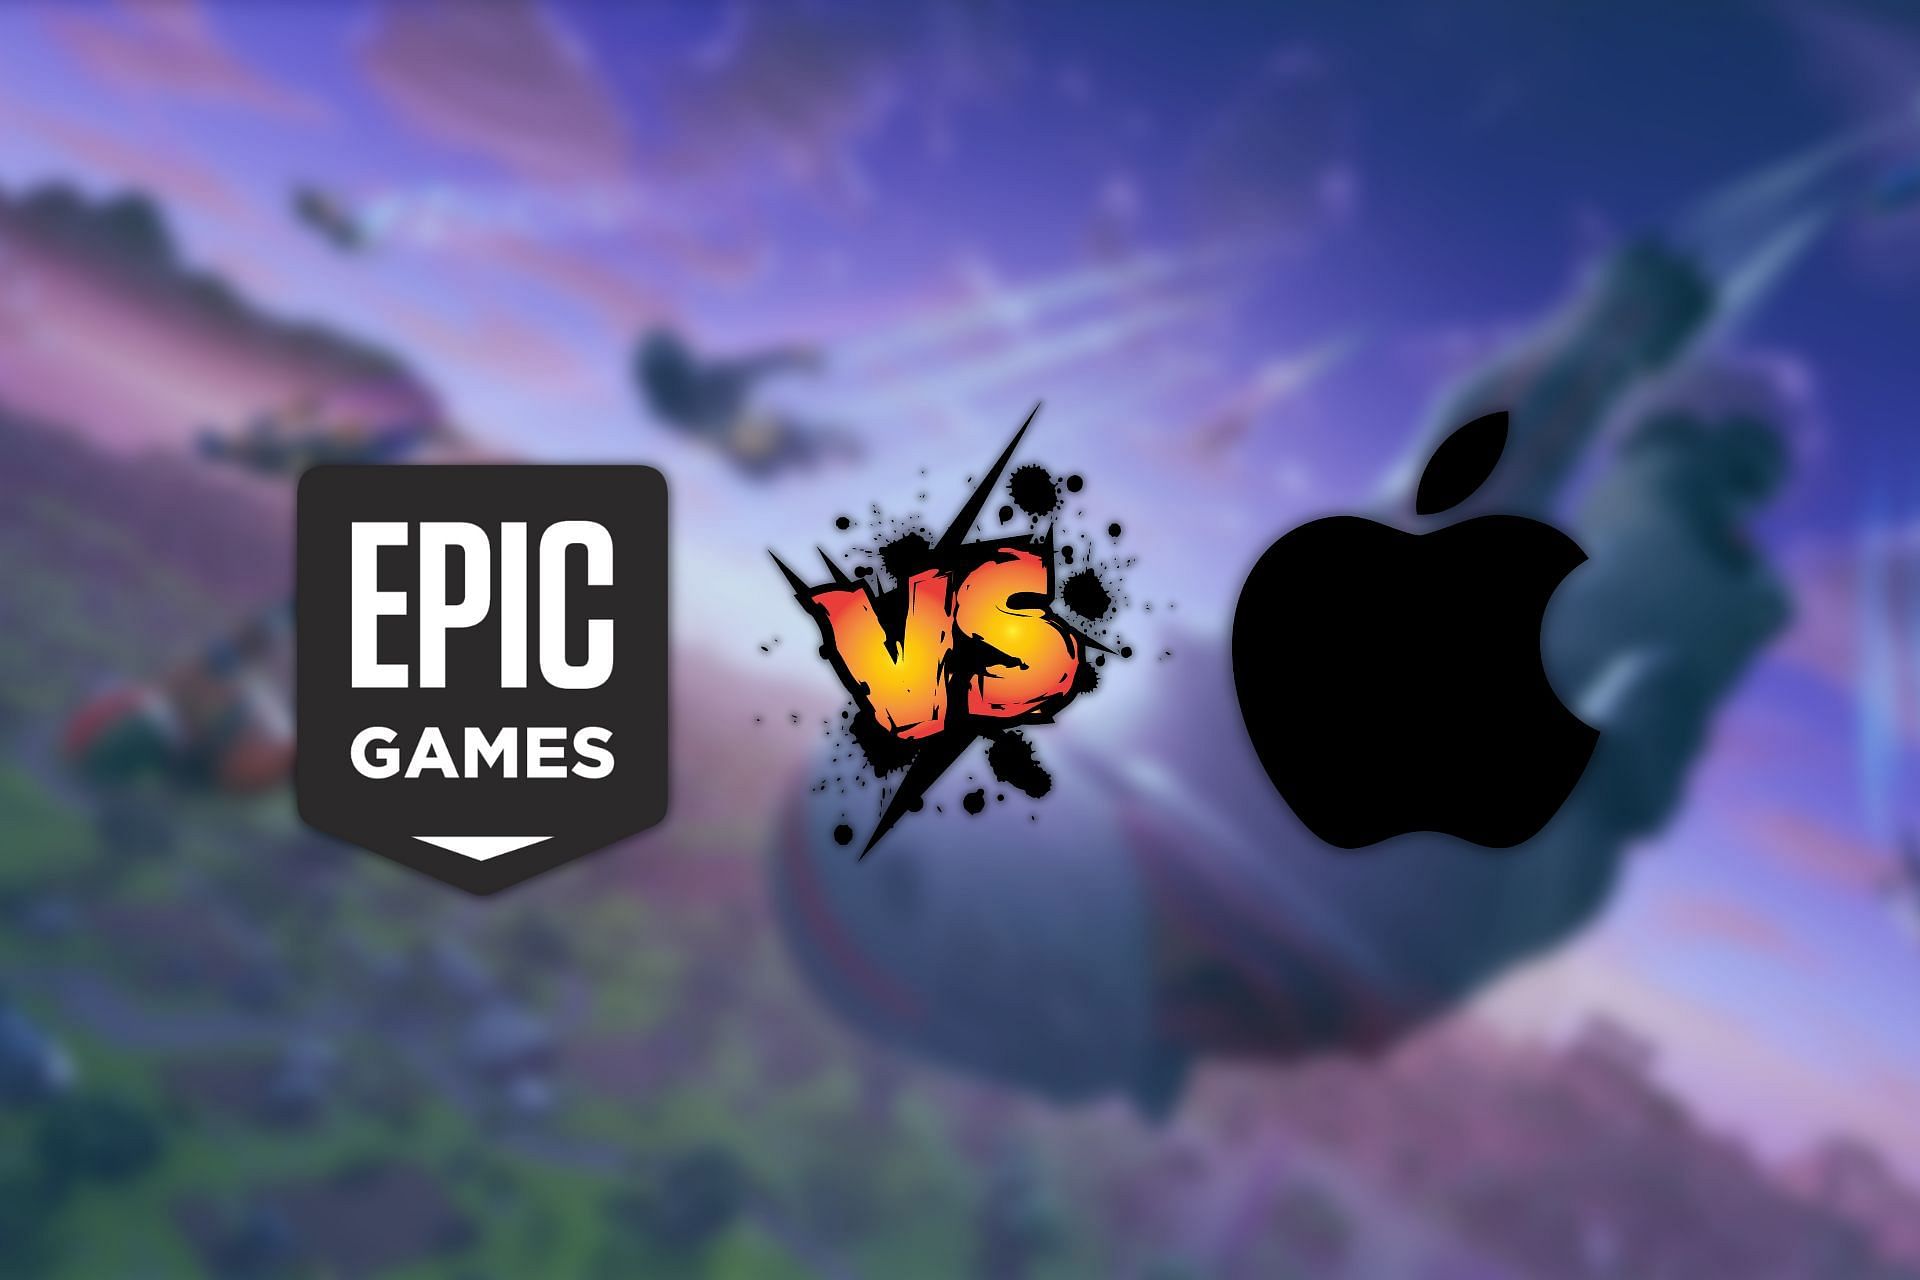 Will Fortnite and Apple come to an agreement? The state of Apple vs Epic Lawsuit in 2021